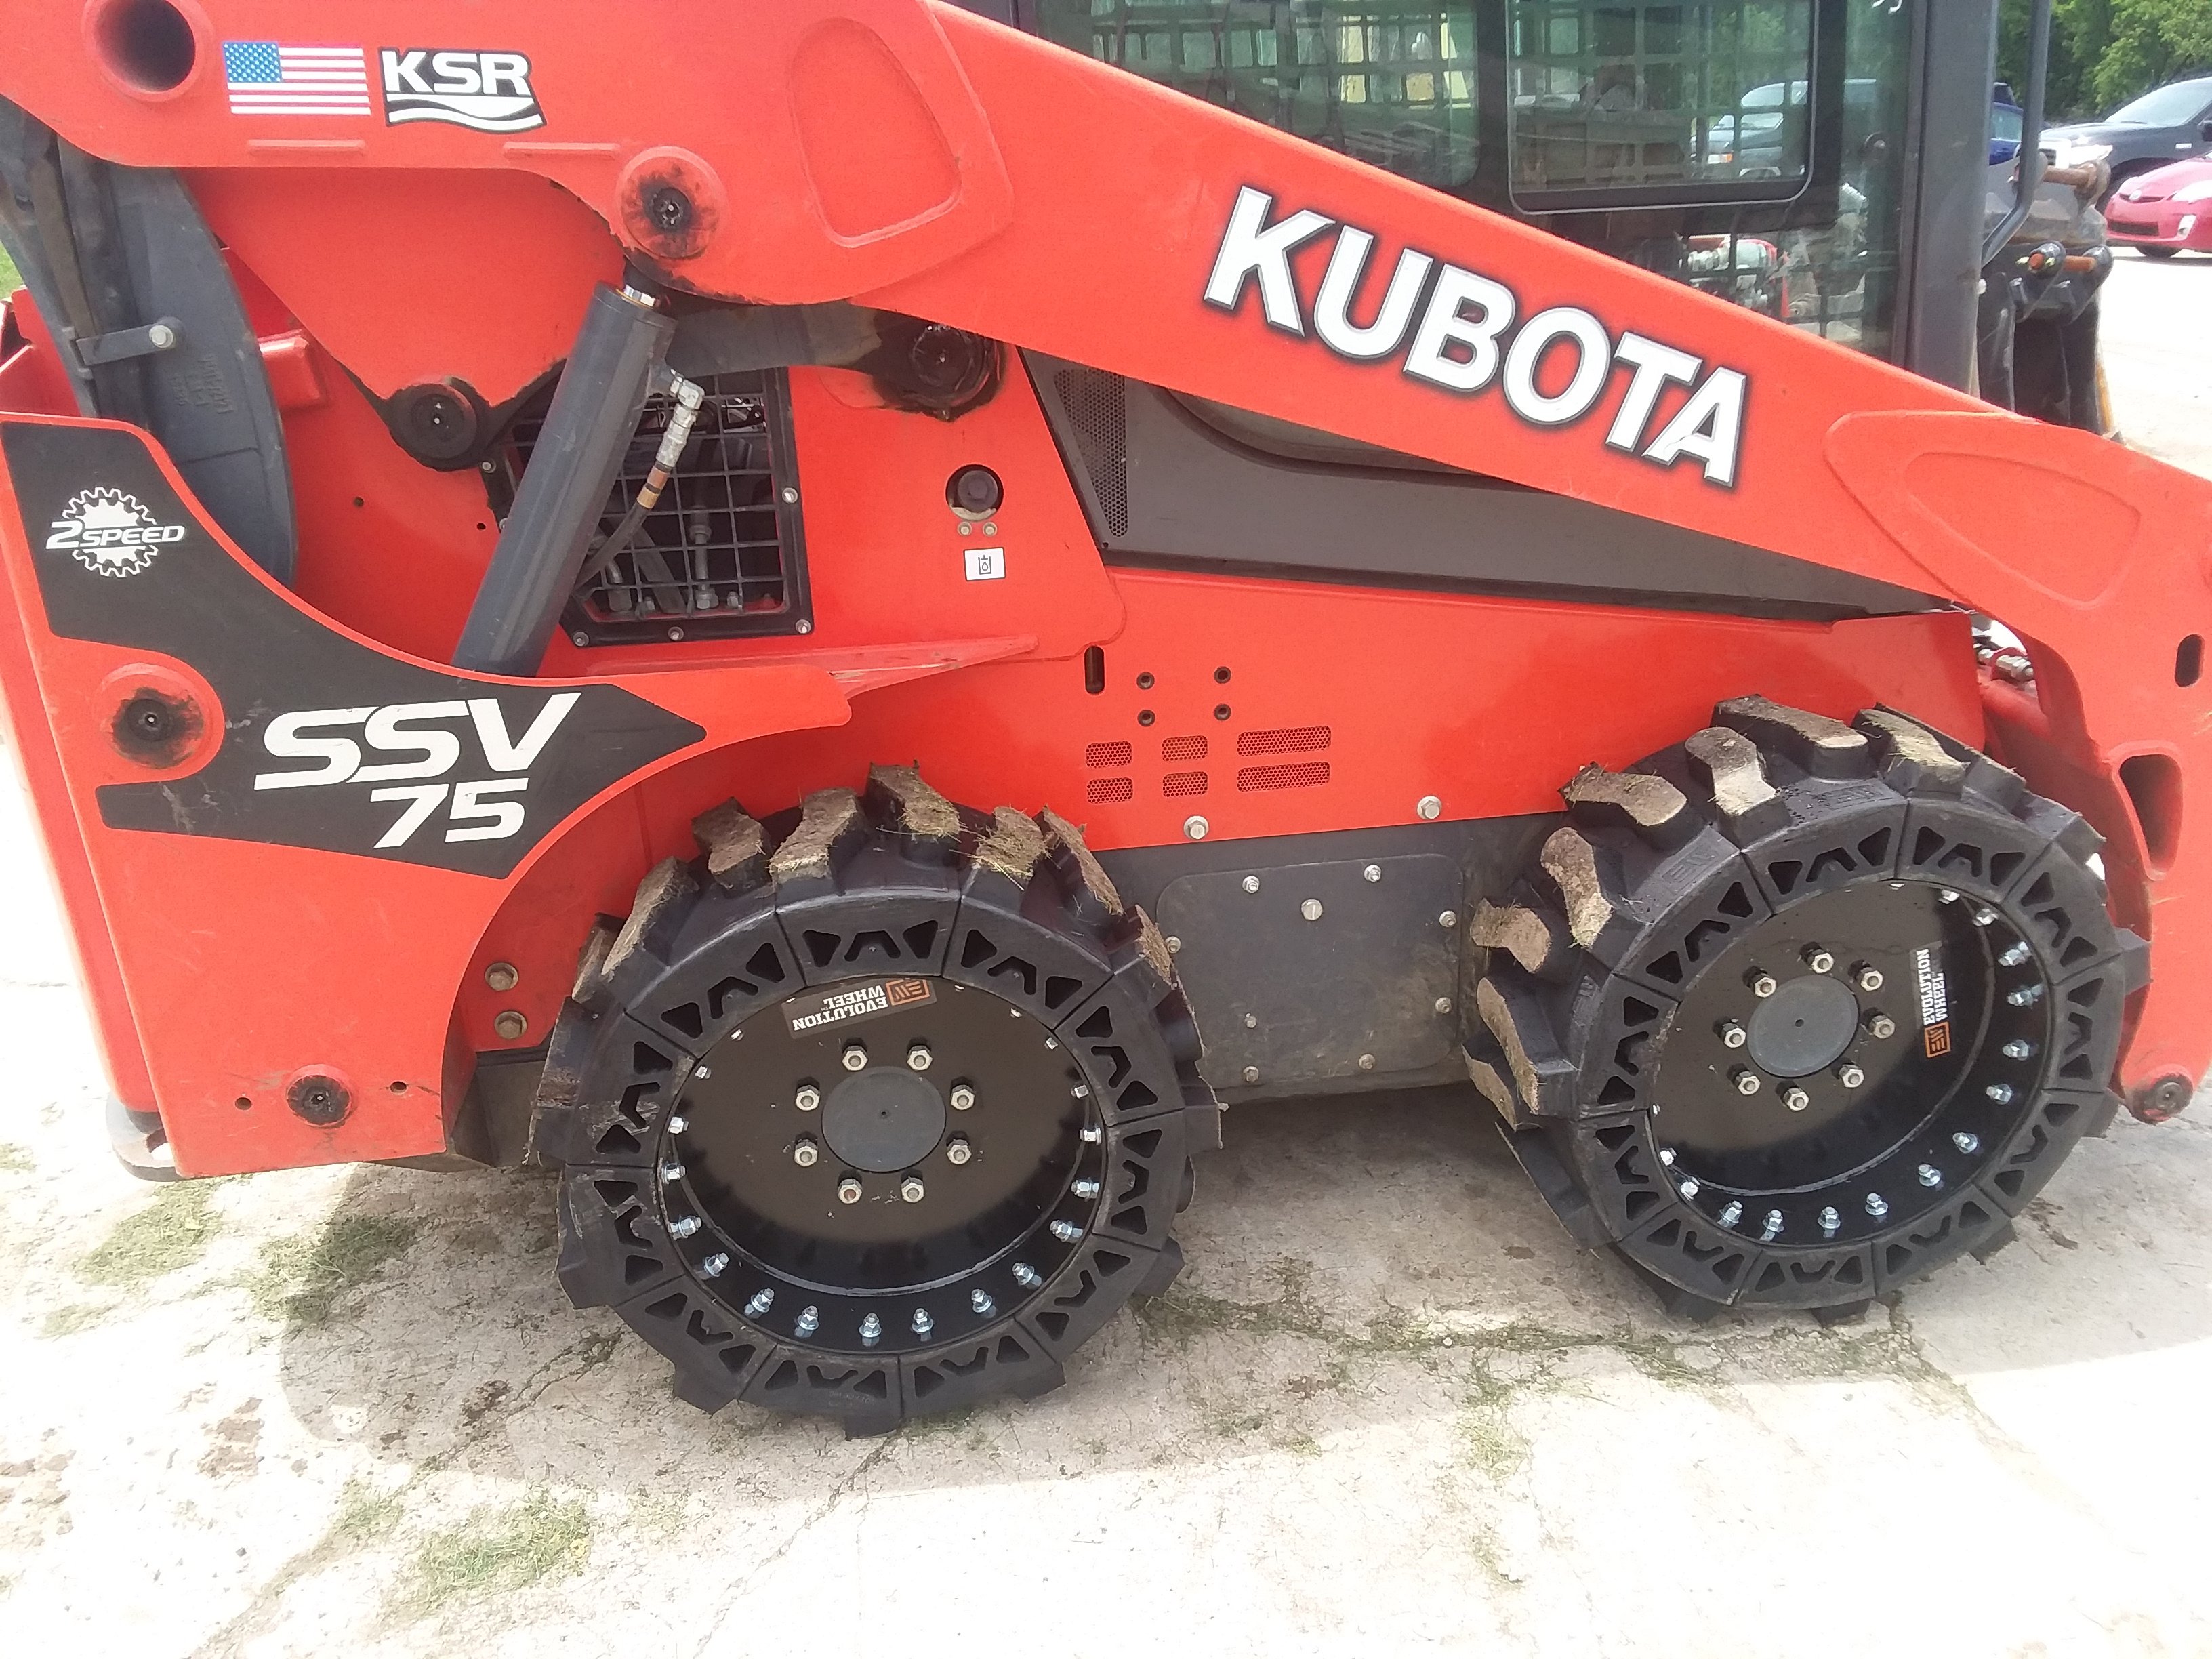 This images shows a red Kubota skid steer using our all terrain skid steer tires the EWRS-AT.